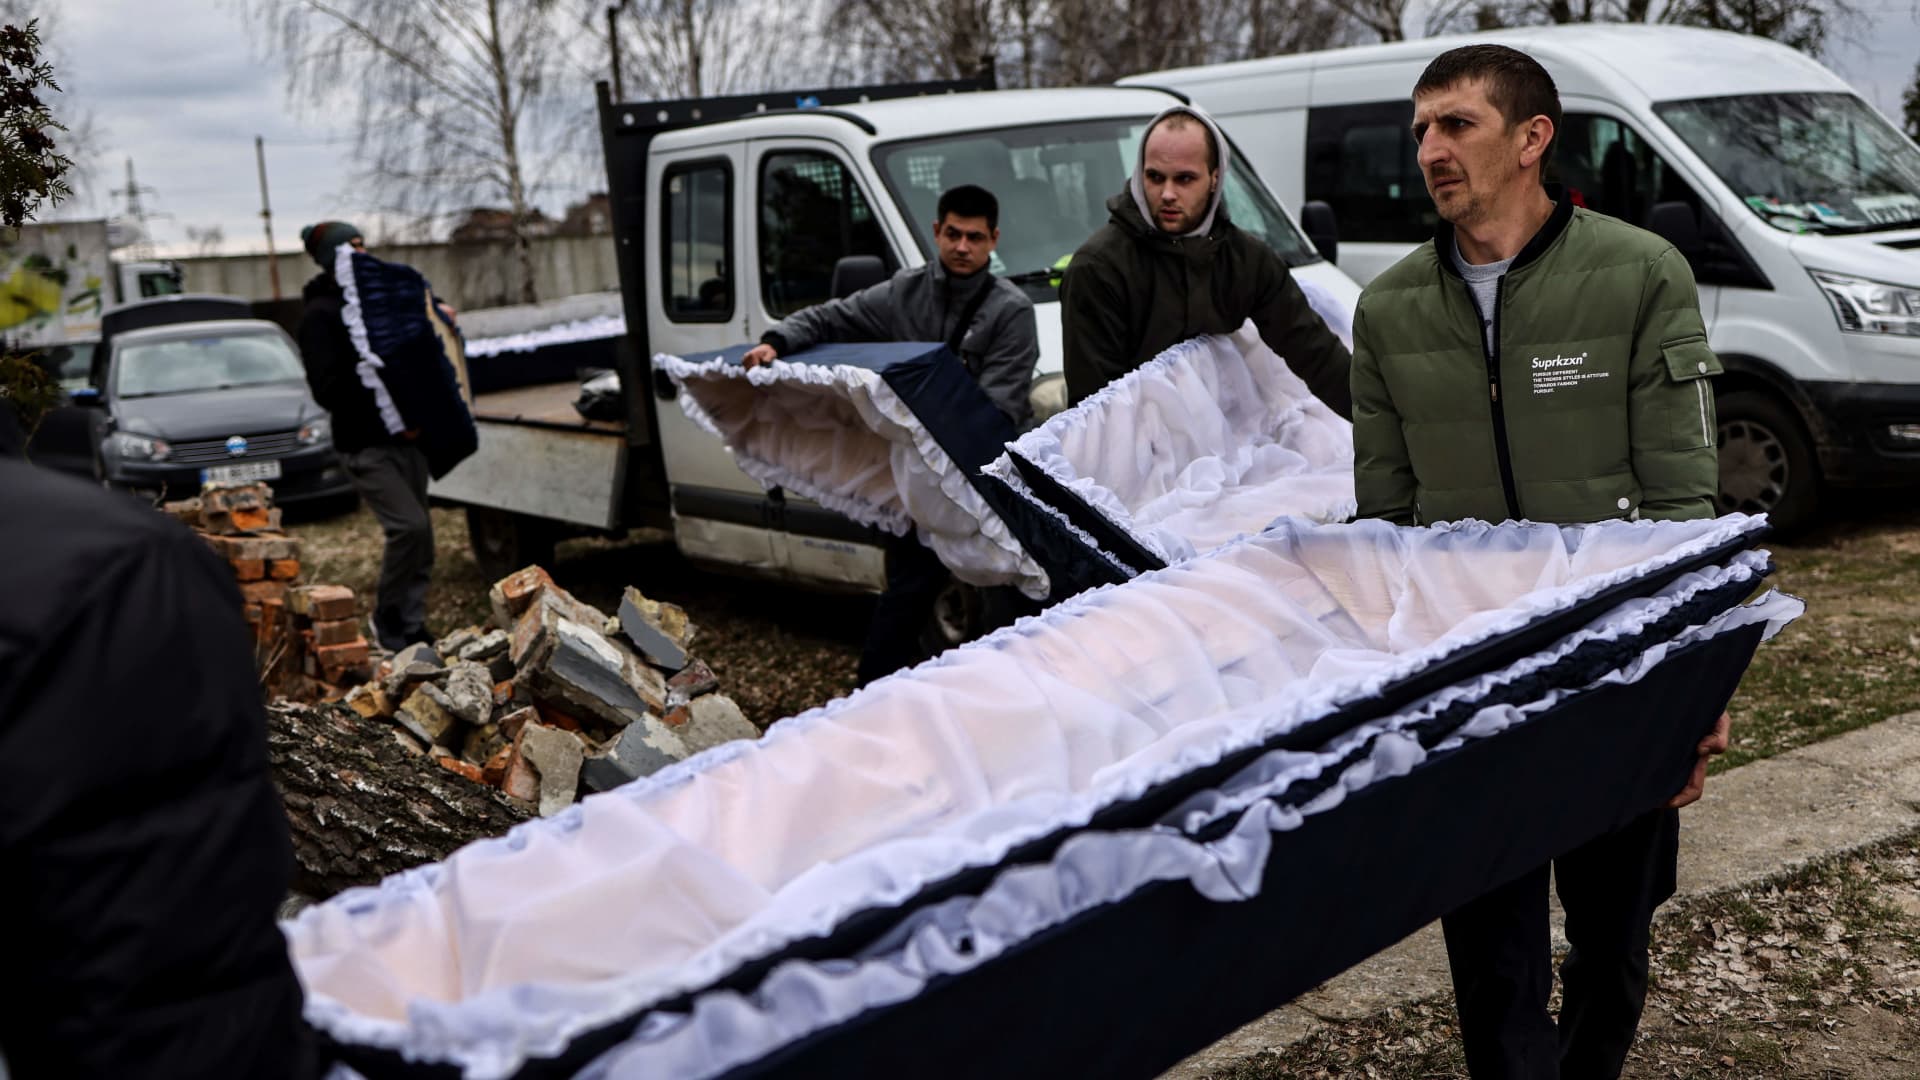 Workers bring coffins where bodies are transported for identification by forensic personnel and police officers in the cemetery in Bucha, north of Kyiv, on April 6, 2022, after hundreds of civilians were found dead in areas from which Russian troops have withdrawn around Ukraine's capital, including the town of Bucha.